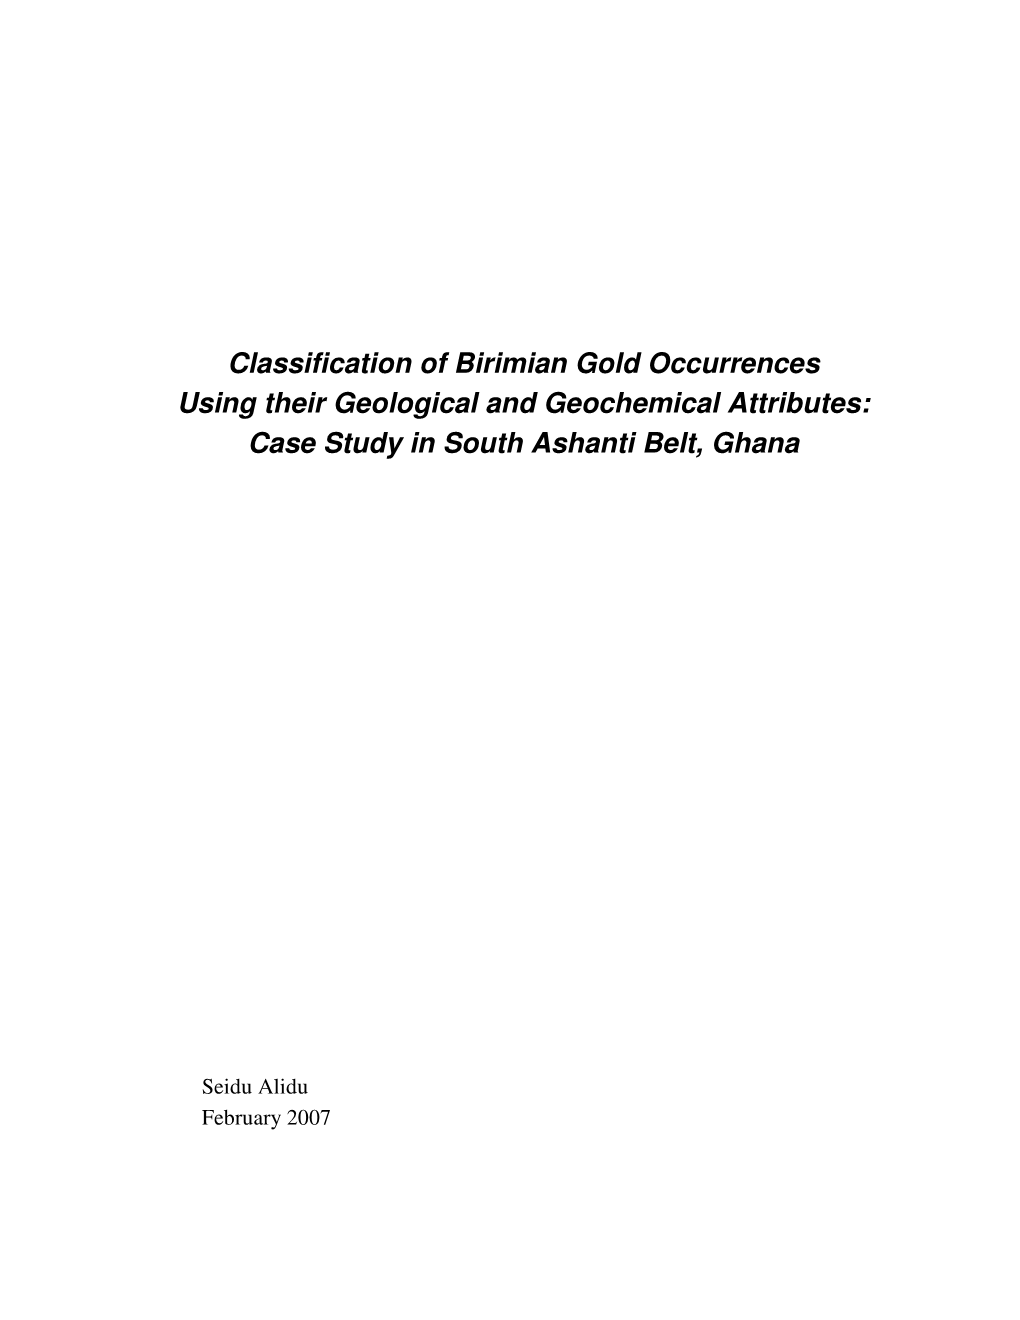 Classification of Birimian Gold Occurrences Using Their Geological and Geochemical Attributes: Case Study in South Ashanti Belt, Ghana